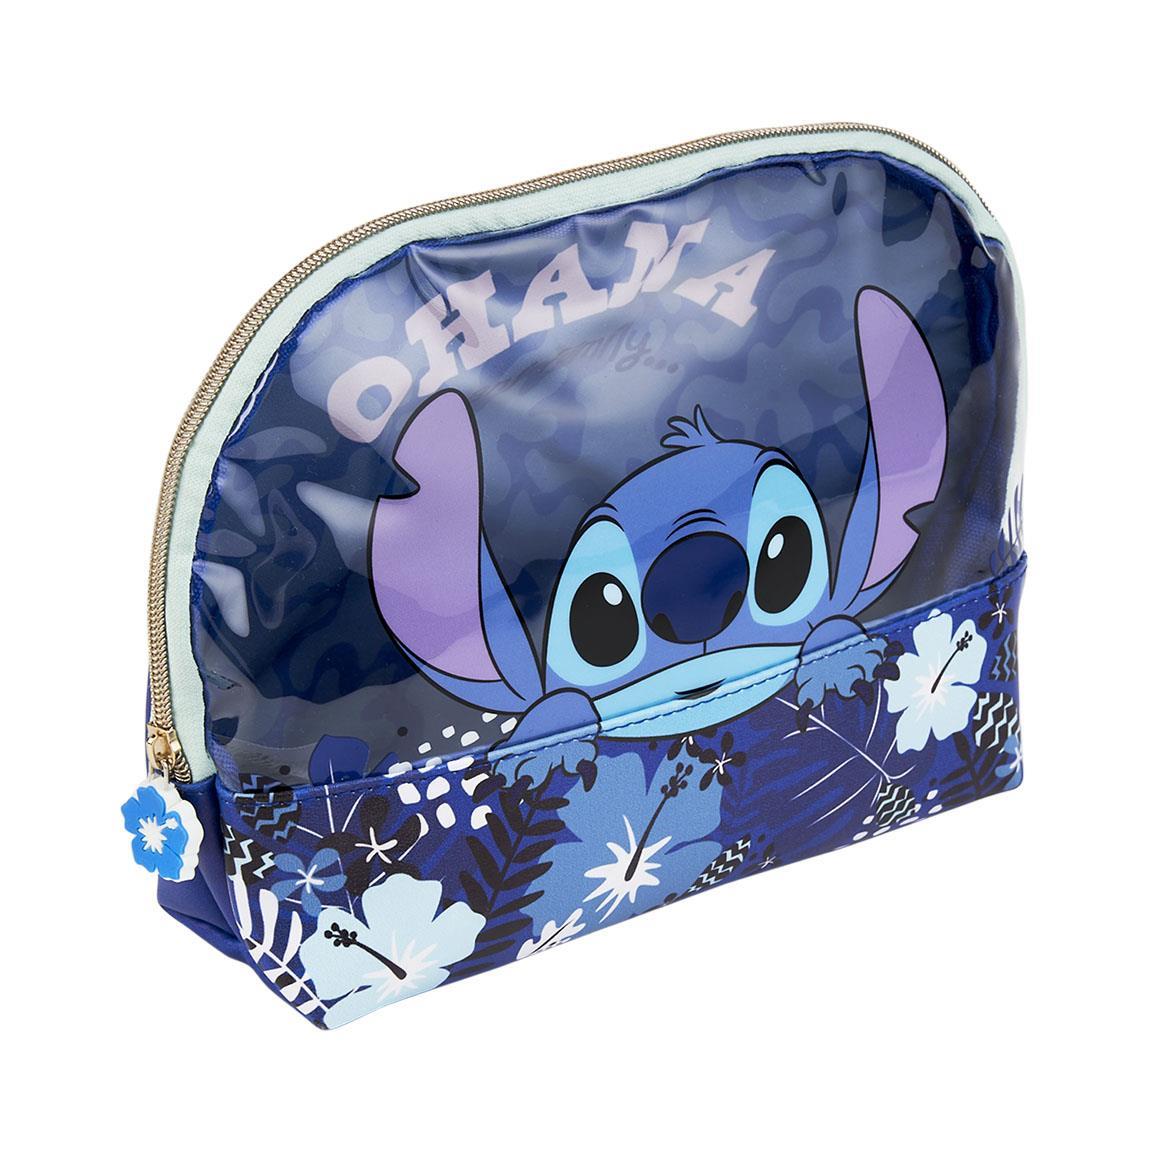 Stitch Adult Travel Toiletry Bag